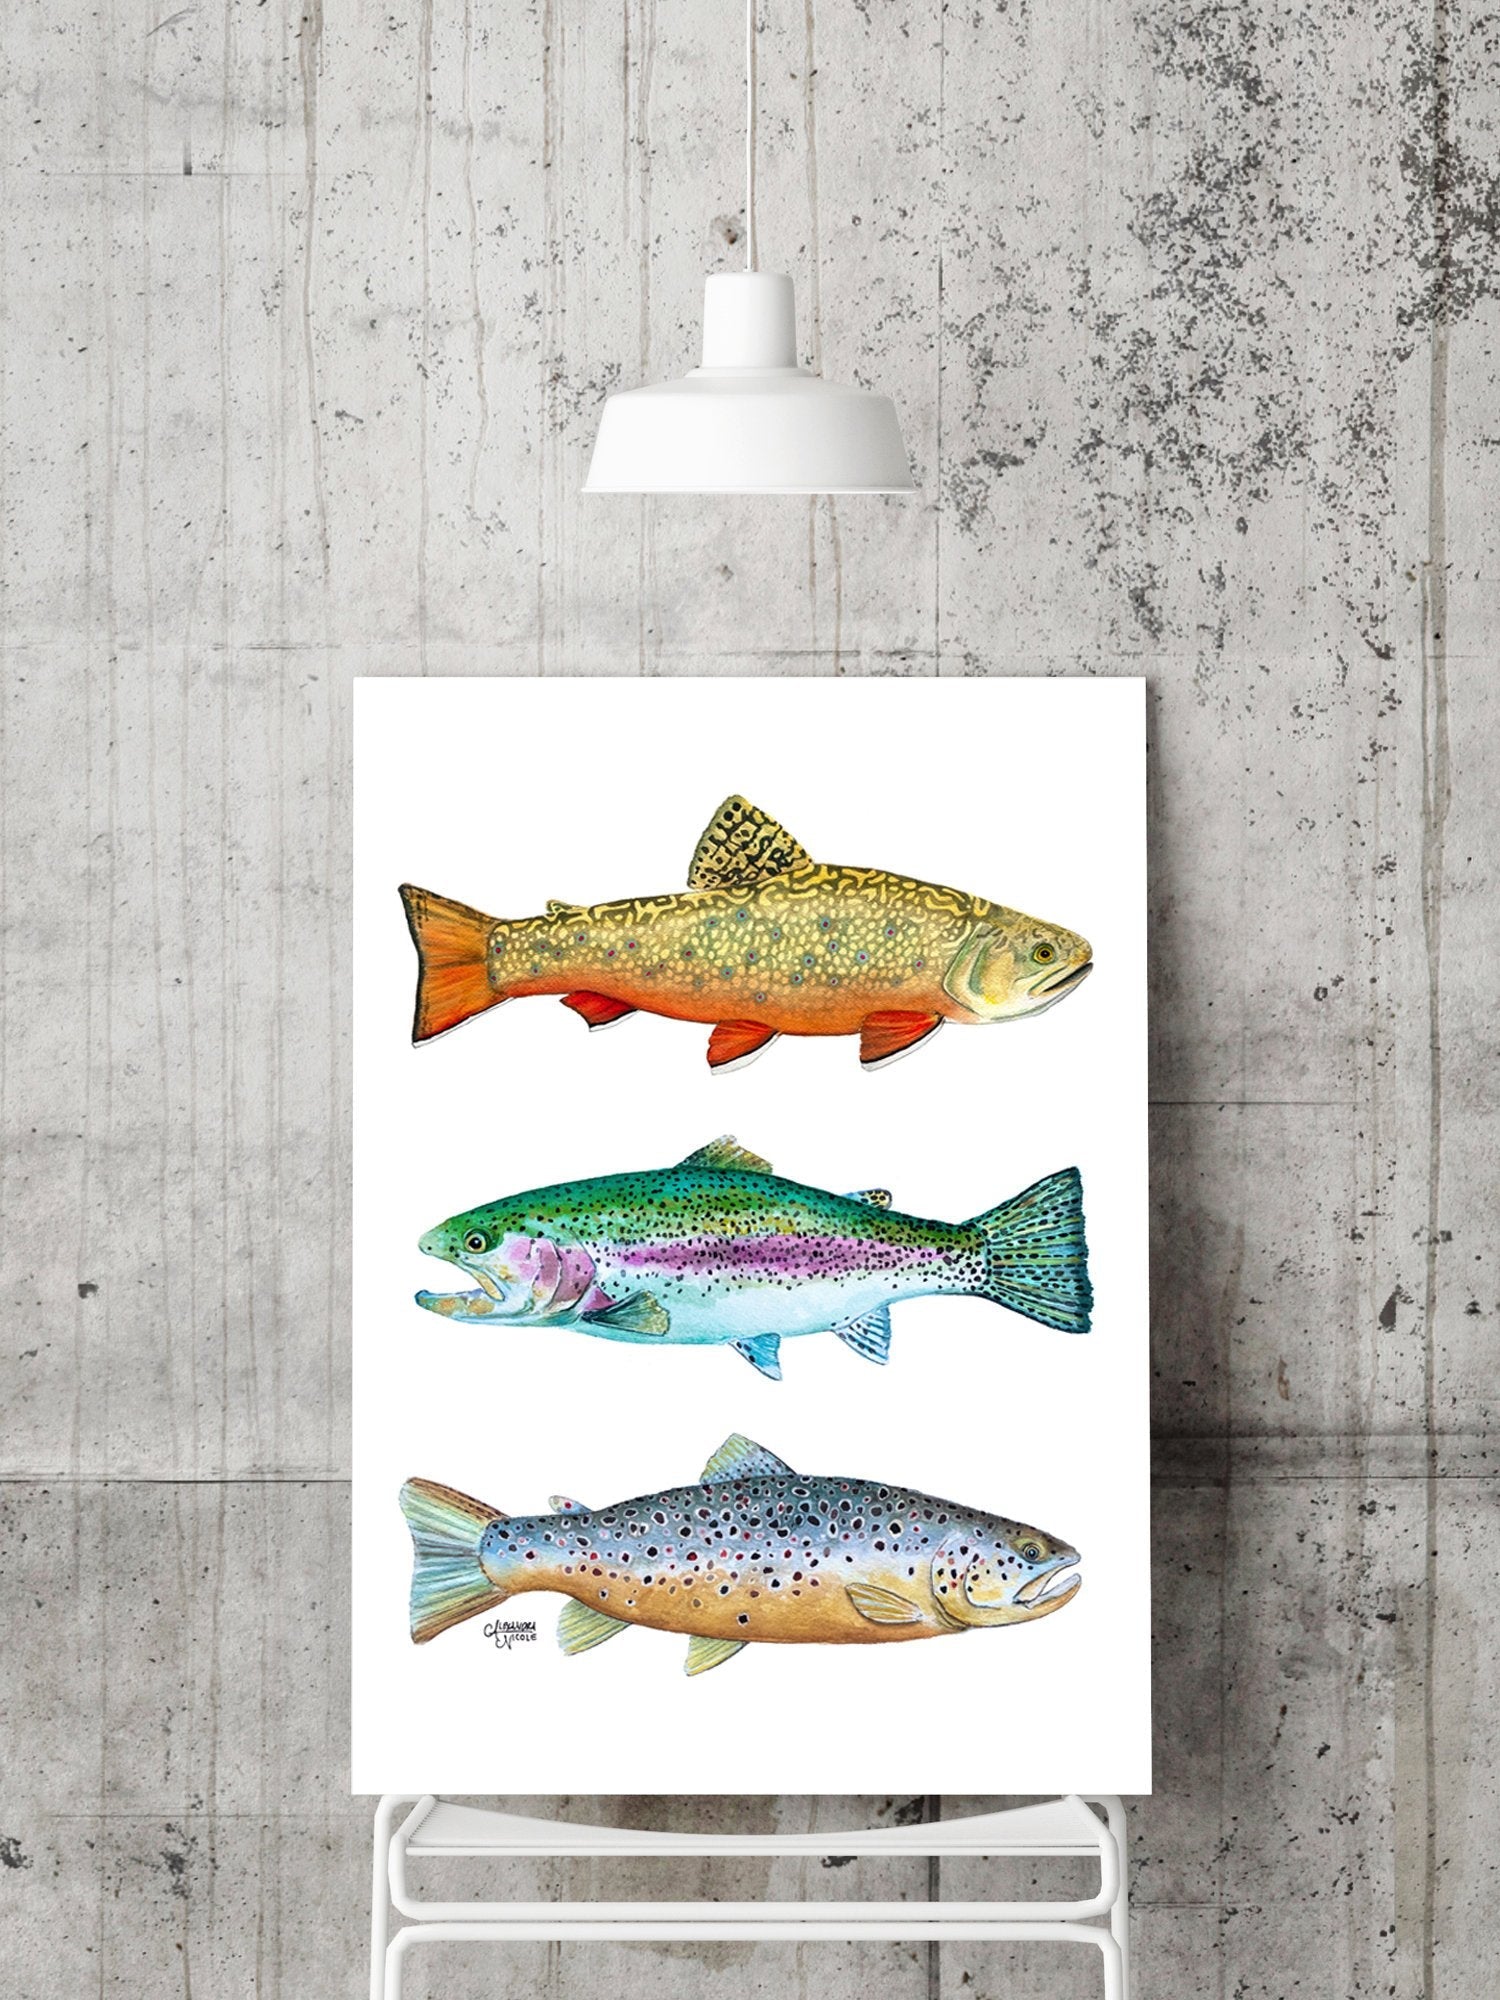 Brook, Brown, and Rainbow Trout Watercolor Print - ArtByAlexandraNicole